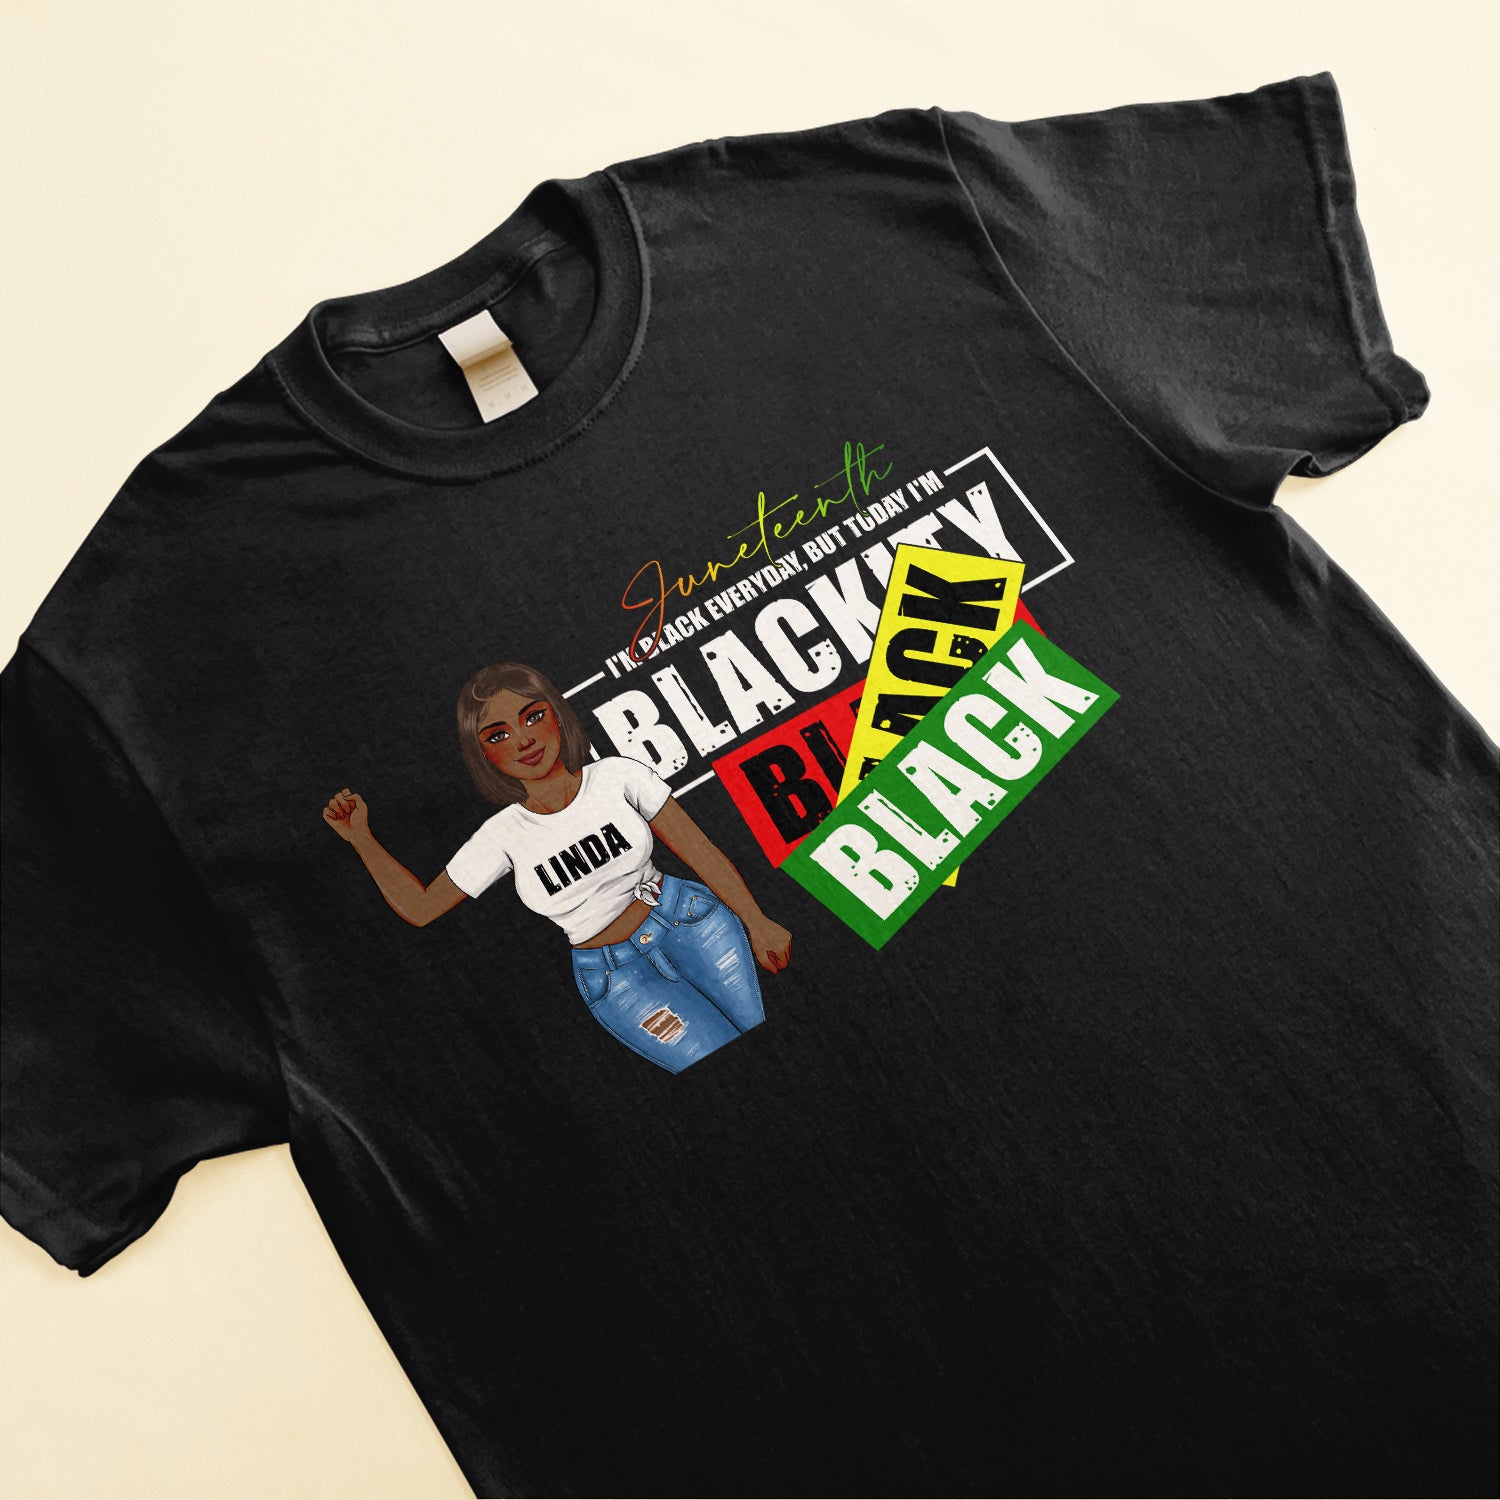 Today I'M Blackcity - Personalized Shirt - Juneteenth Independence Day, Black history Gift For Black Woman, Black Girl - Black Lives Matter